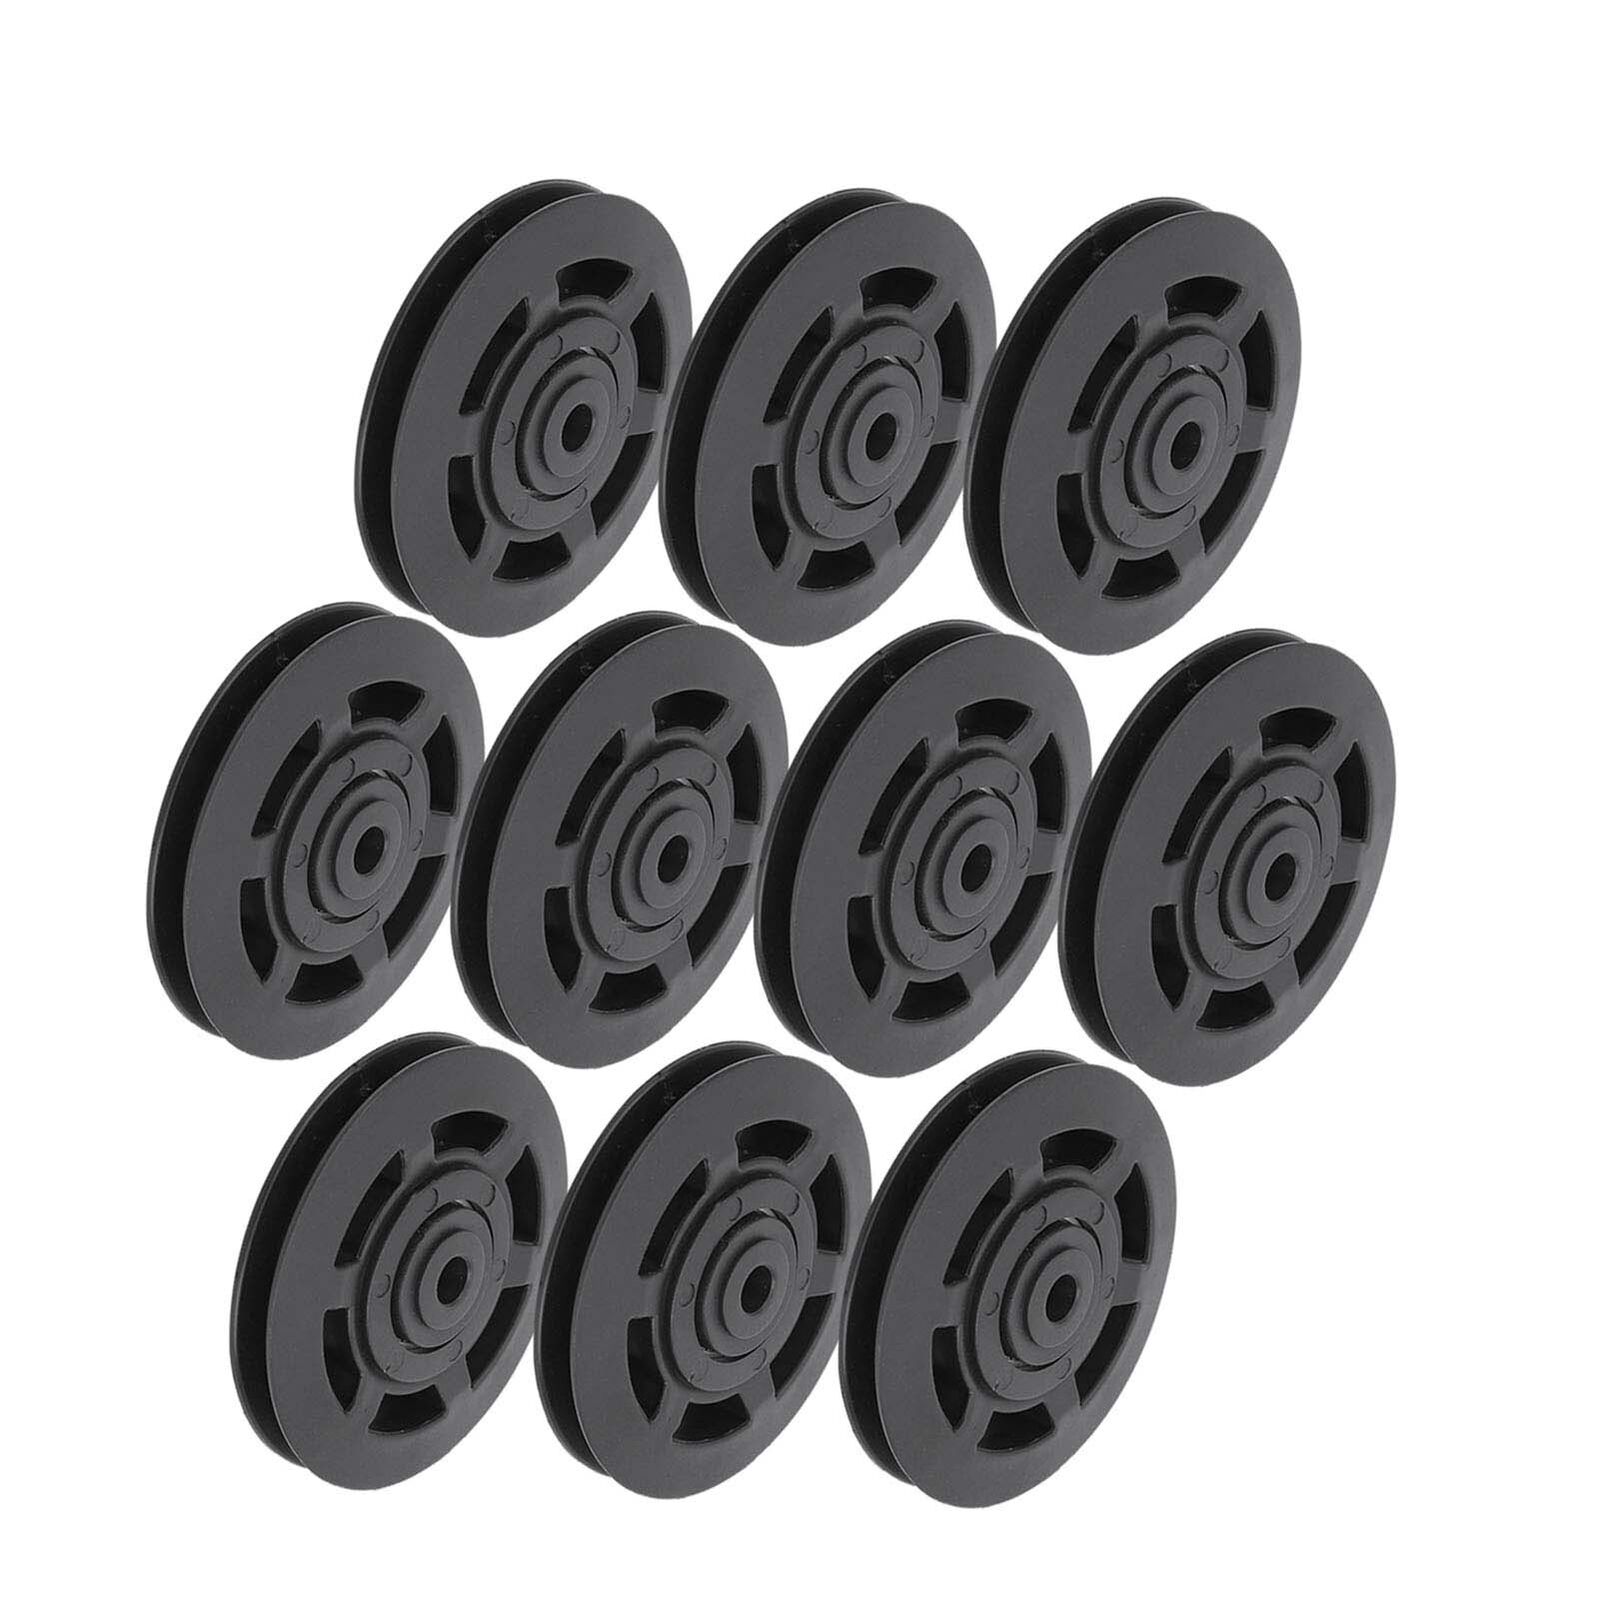 10Pcs/Set 95MM Nylon Bearing Pulley Wheel For Cable HMO